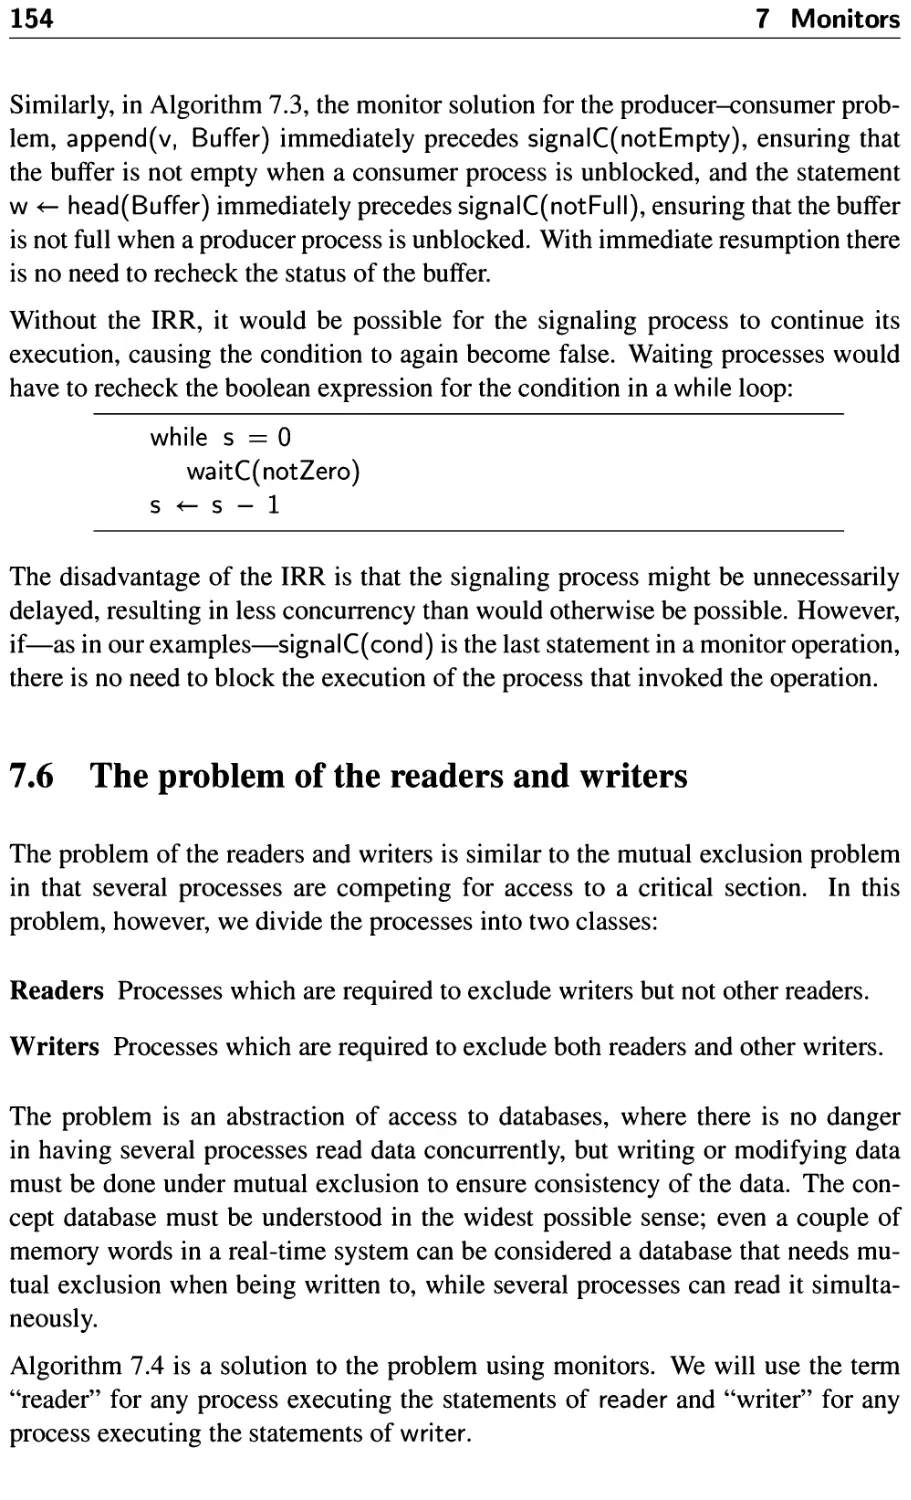 7.6 The problem of the readers and writers